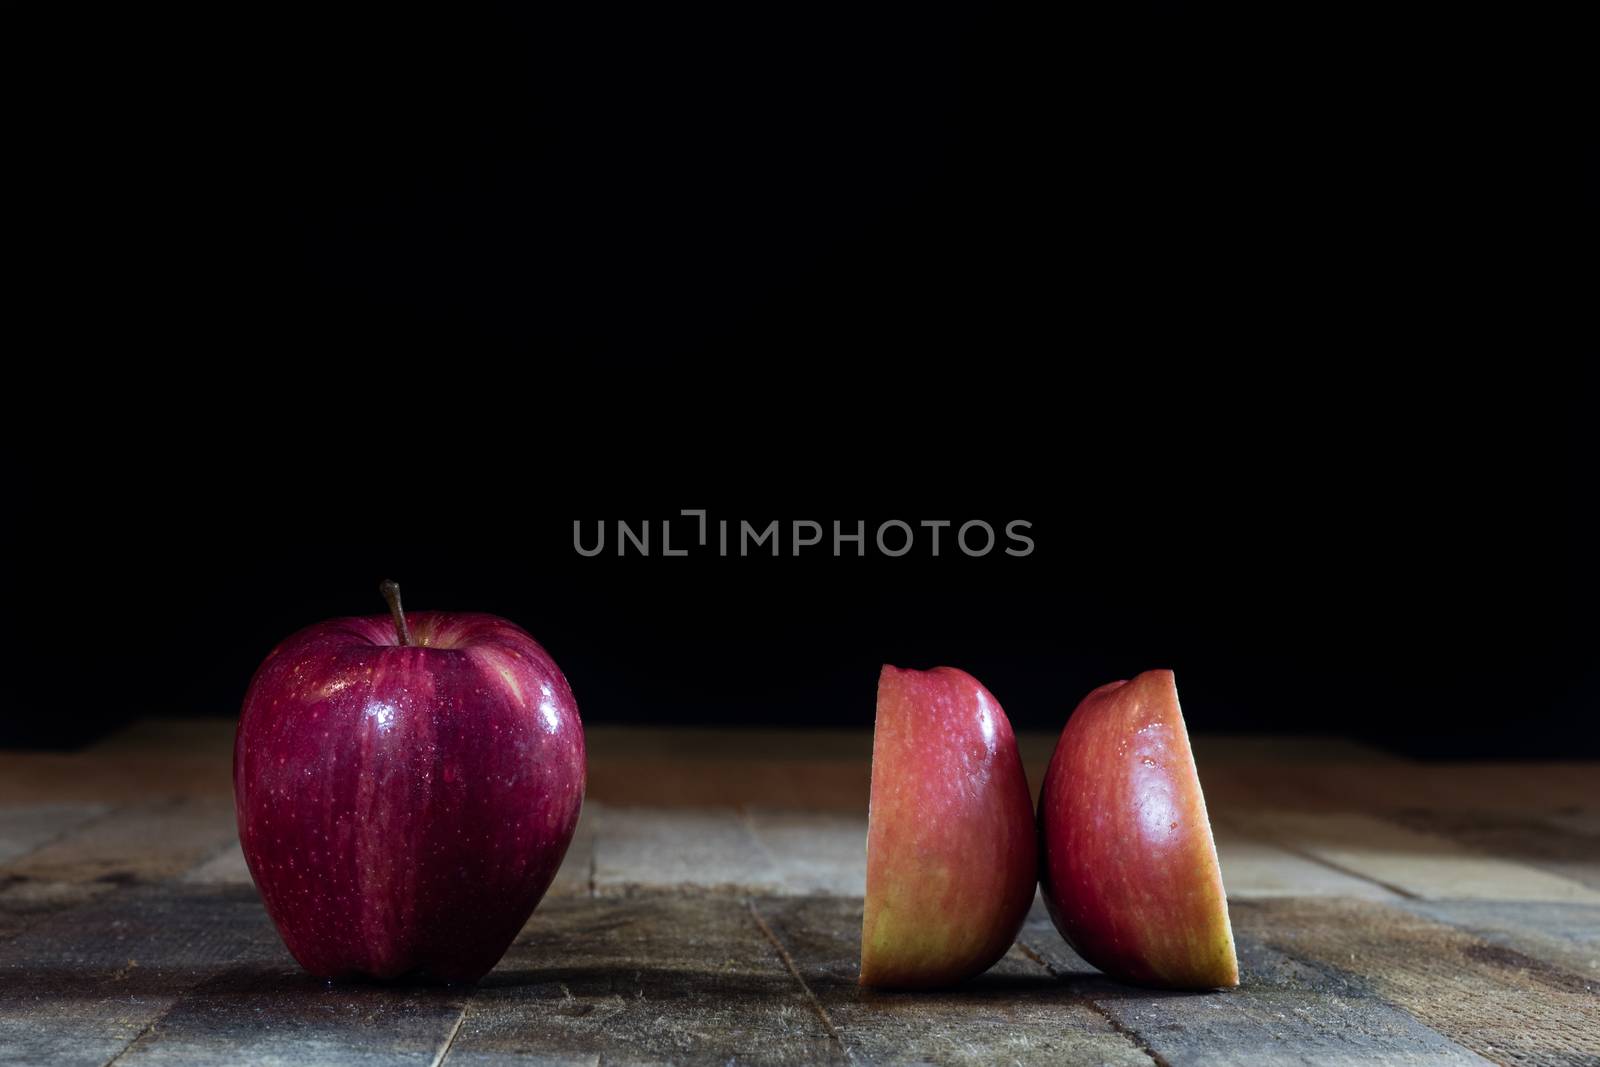 Red tasty wet apple on a wooden table. Black background.